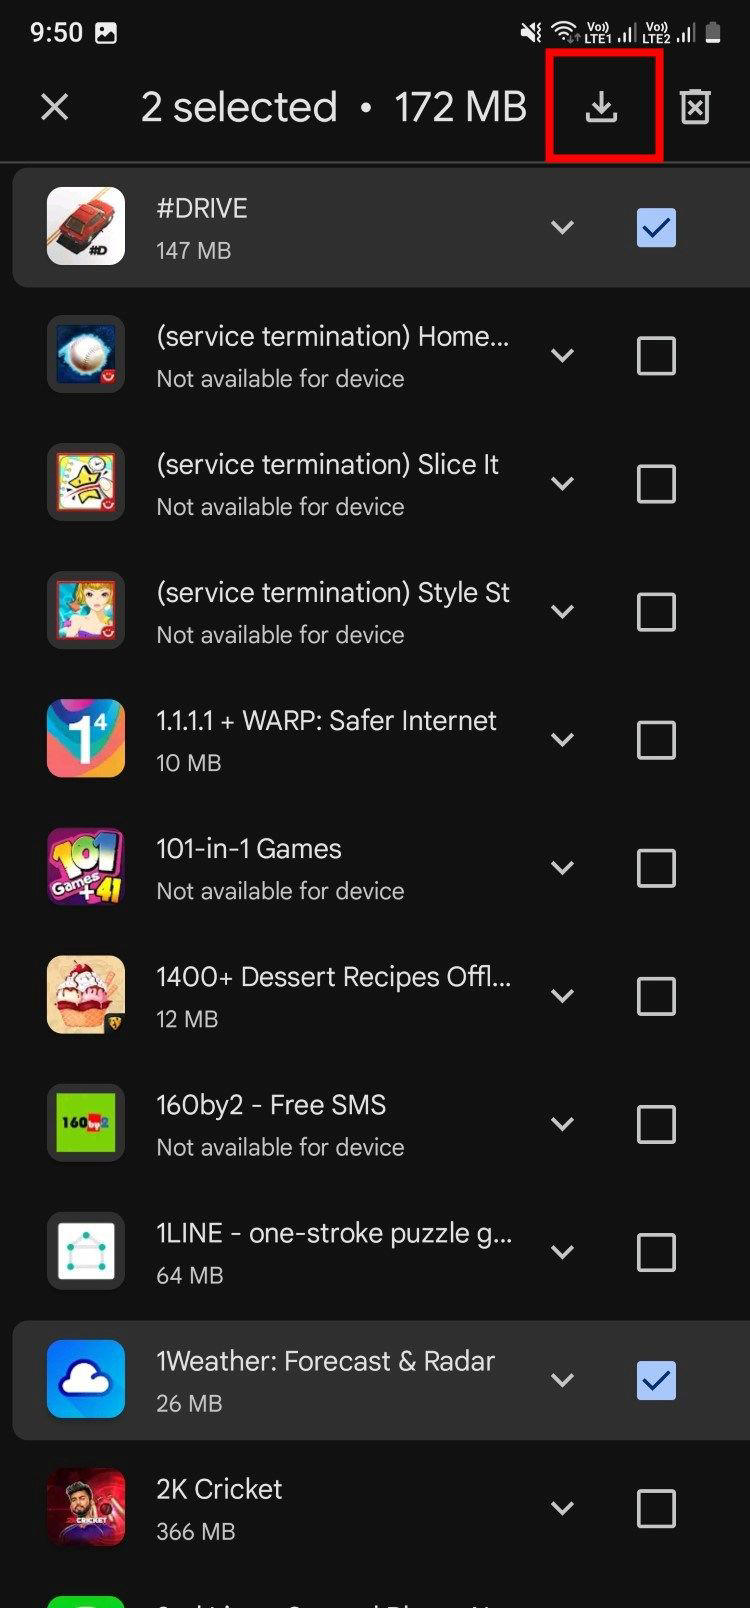 Select the deleted apps and download them in Google Play Store